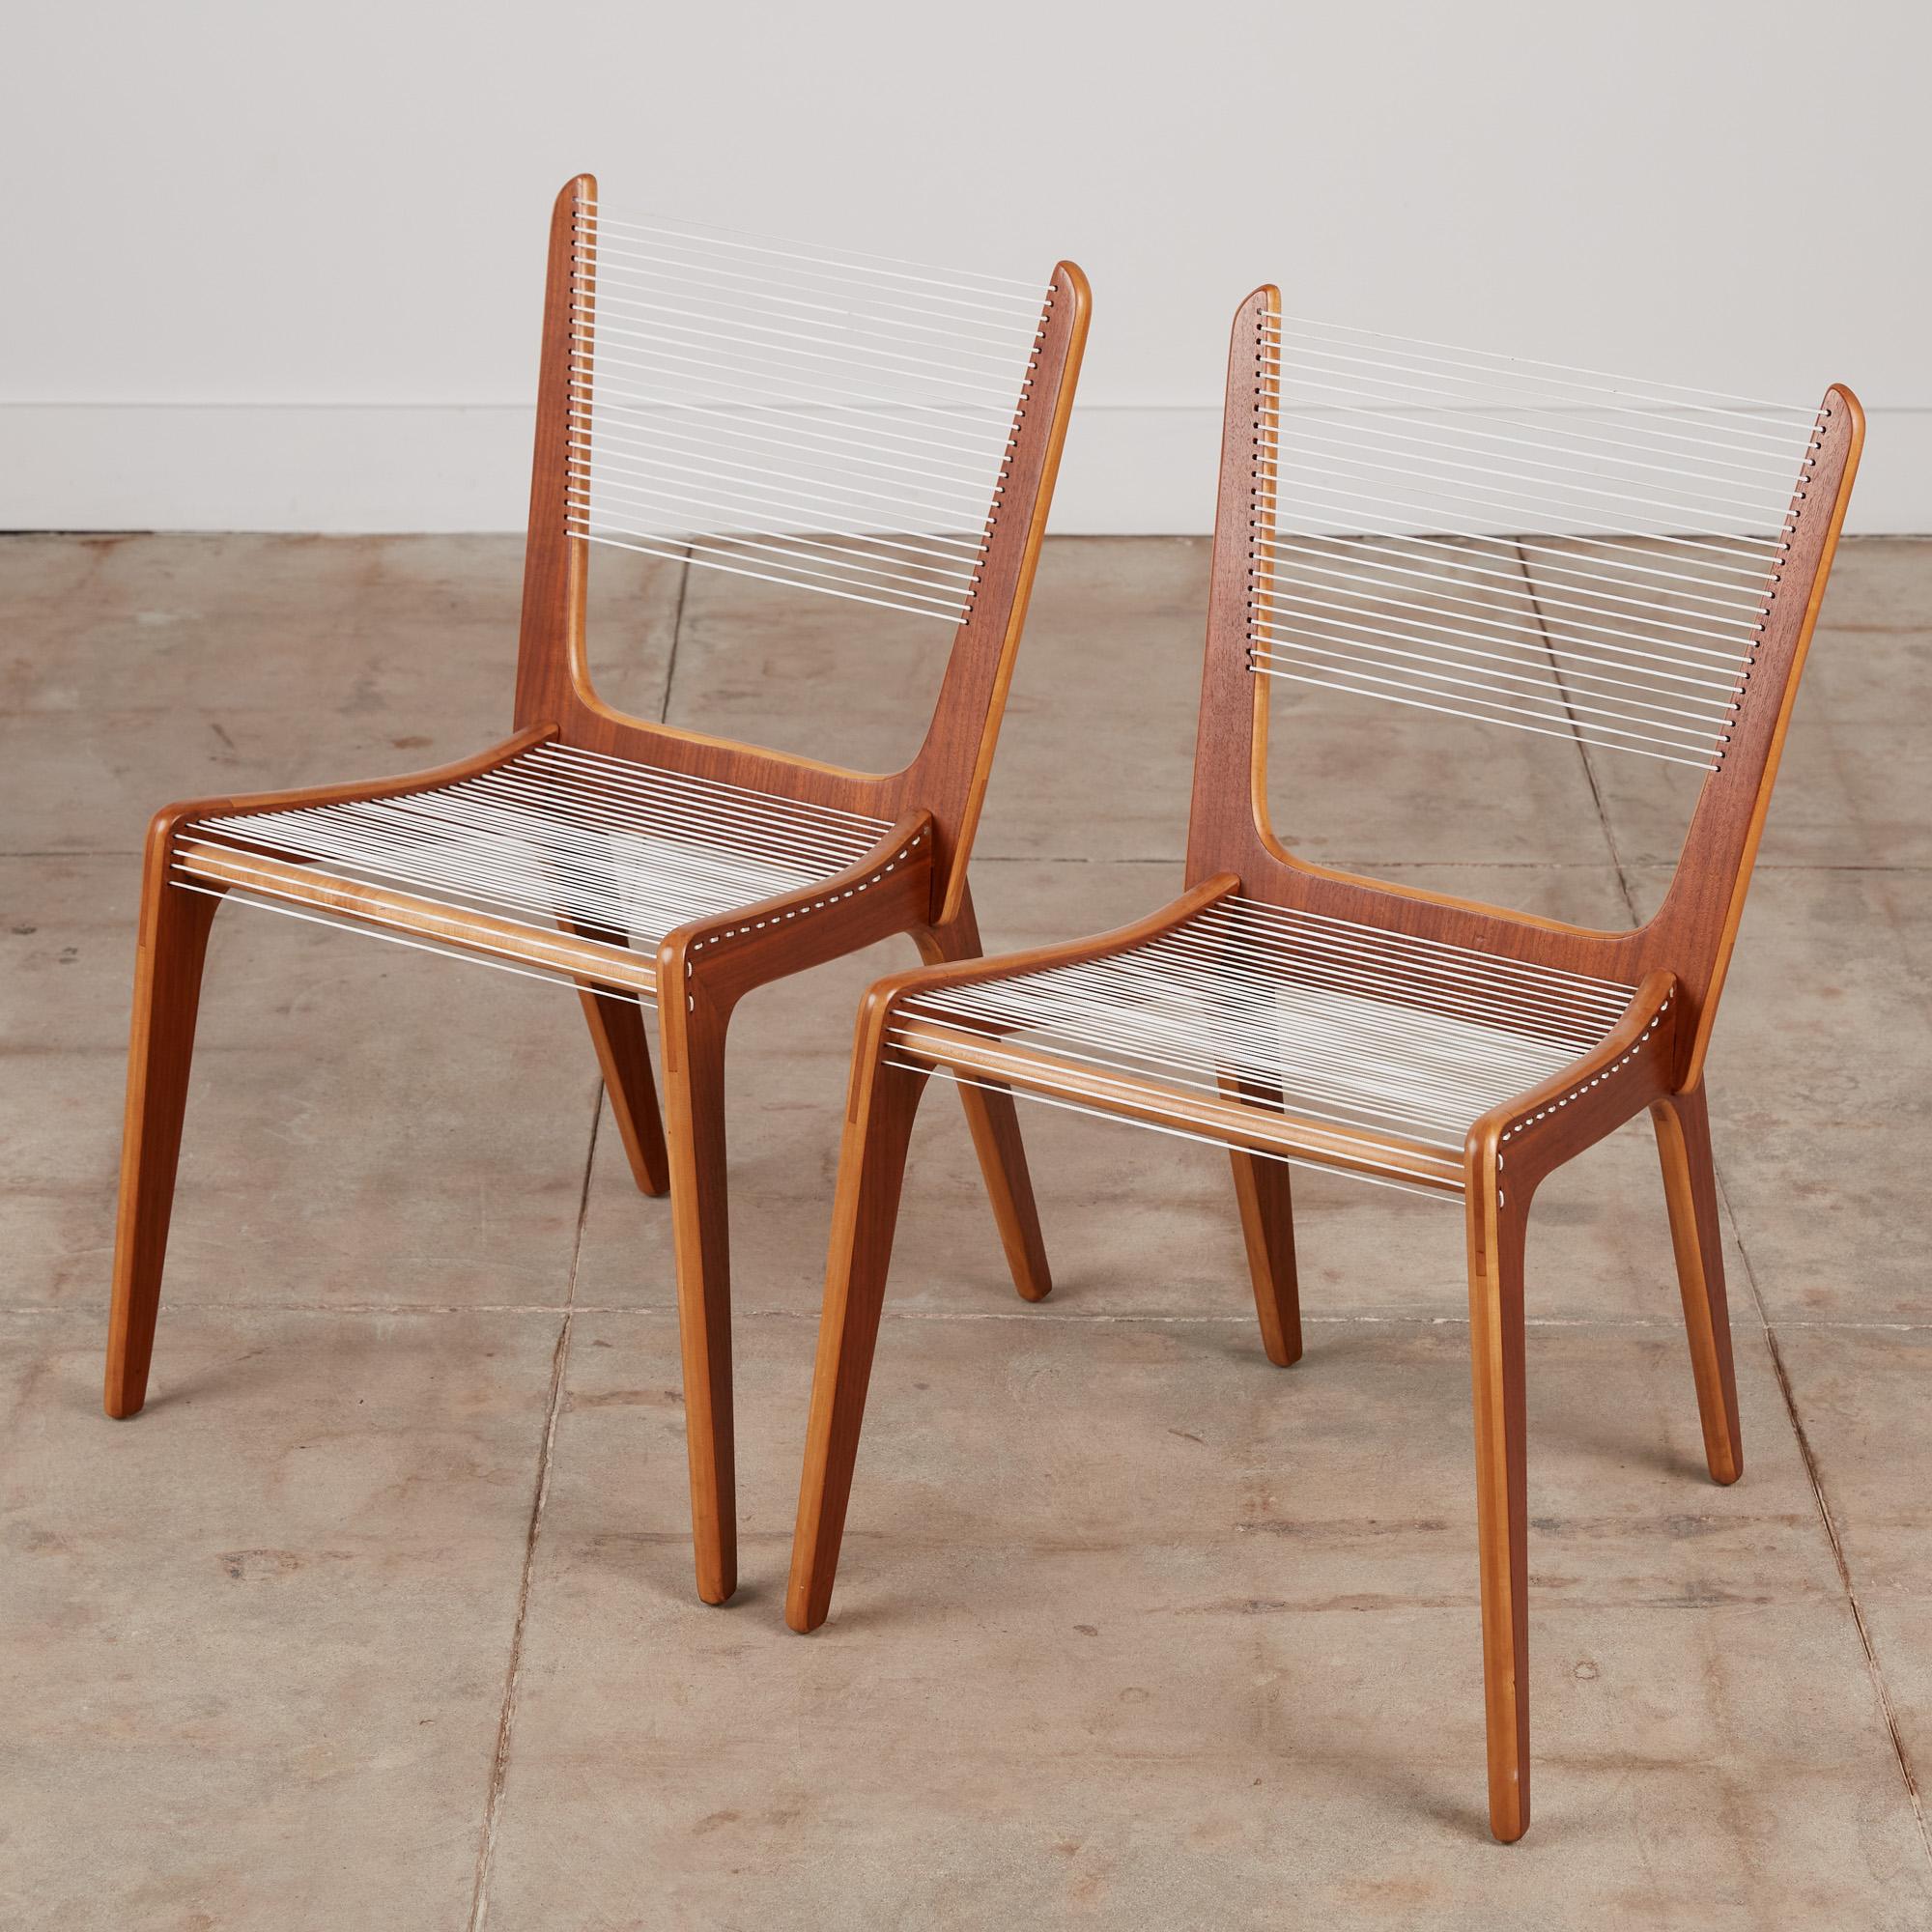 A pair of delicate accent chair by French Canadian designer Jacques Guillon. Designed in 1953, nearly transparent design consists of three interlocking wooden pieces stacked maple plywood faced with a contrasting walnut veneer joined by a wooden